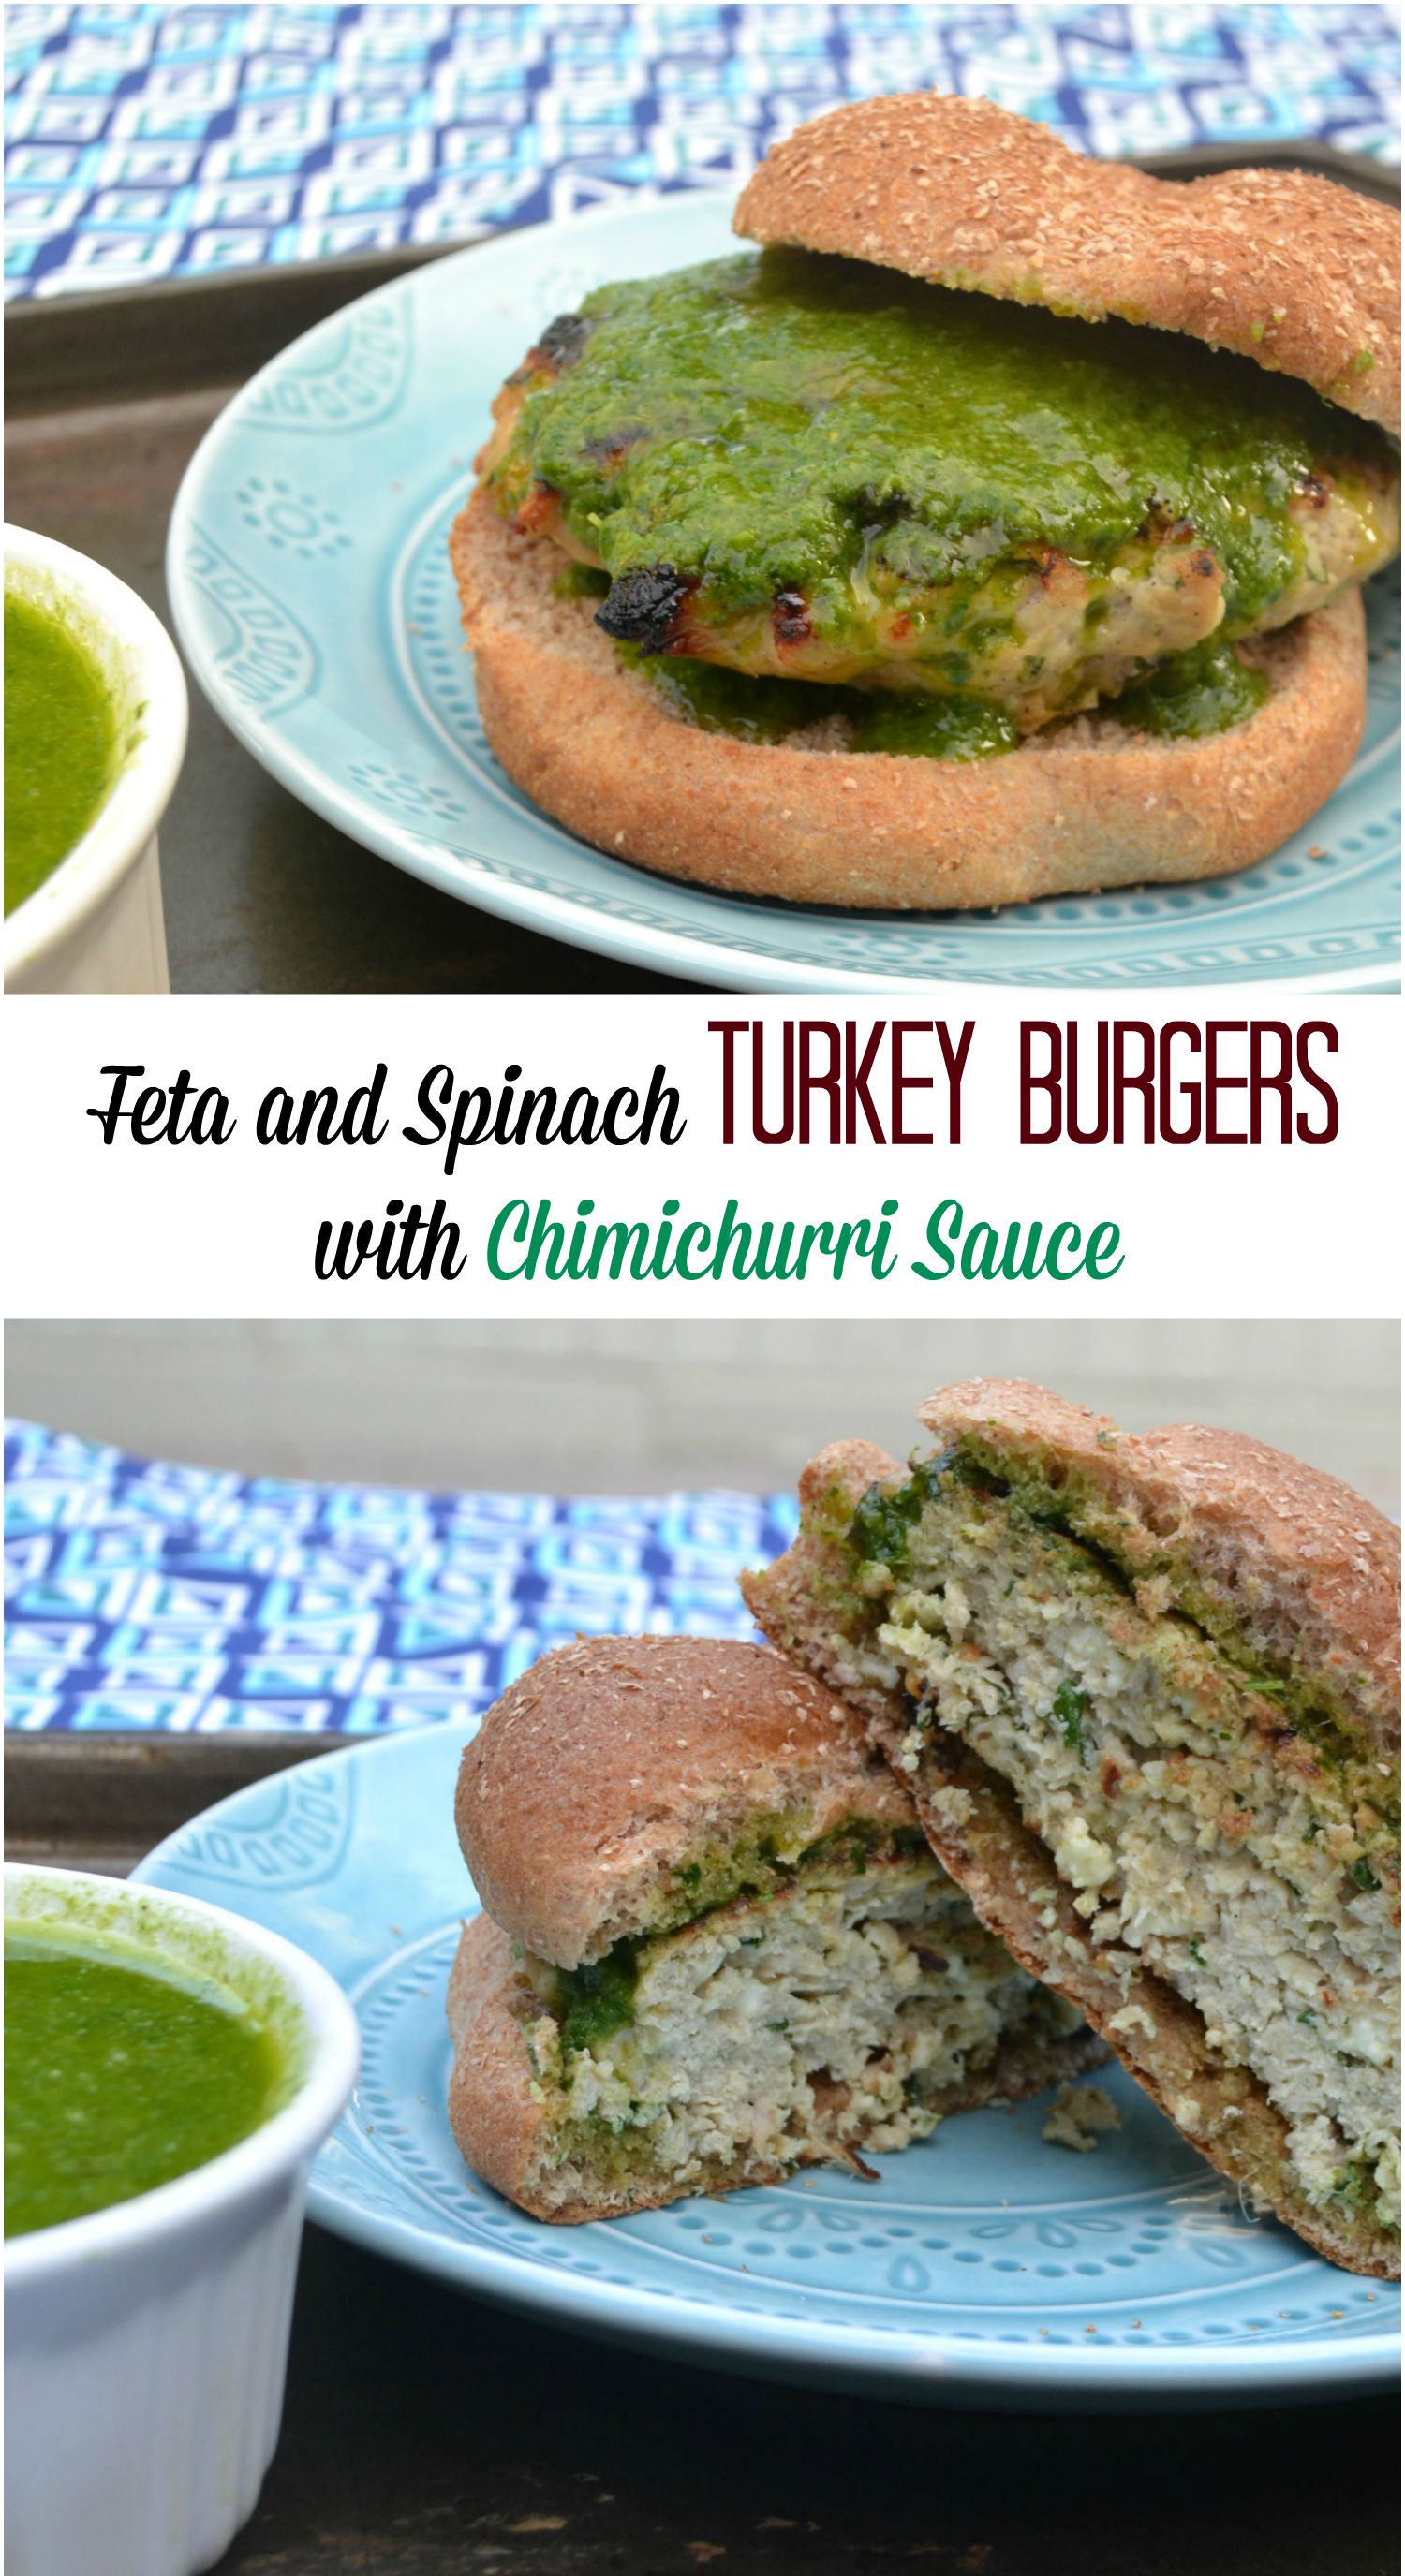 Feta and Spinach Turkey Burgers with Chimichurri Sauce